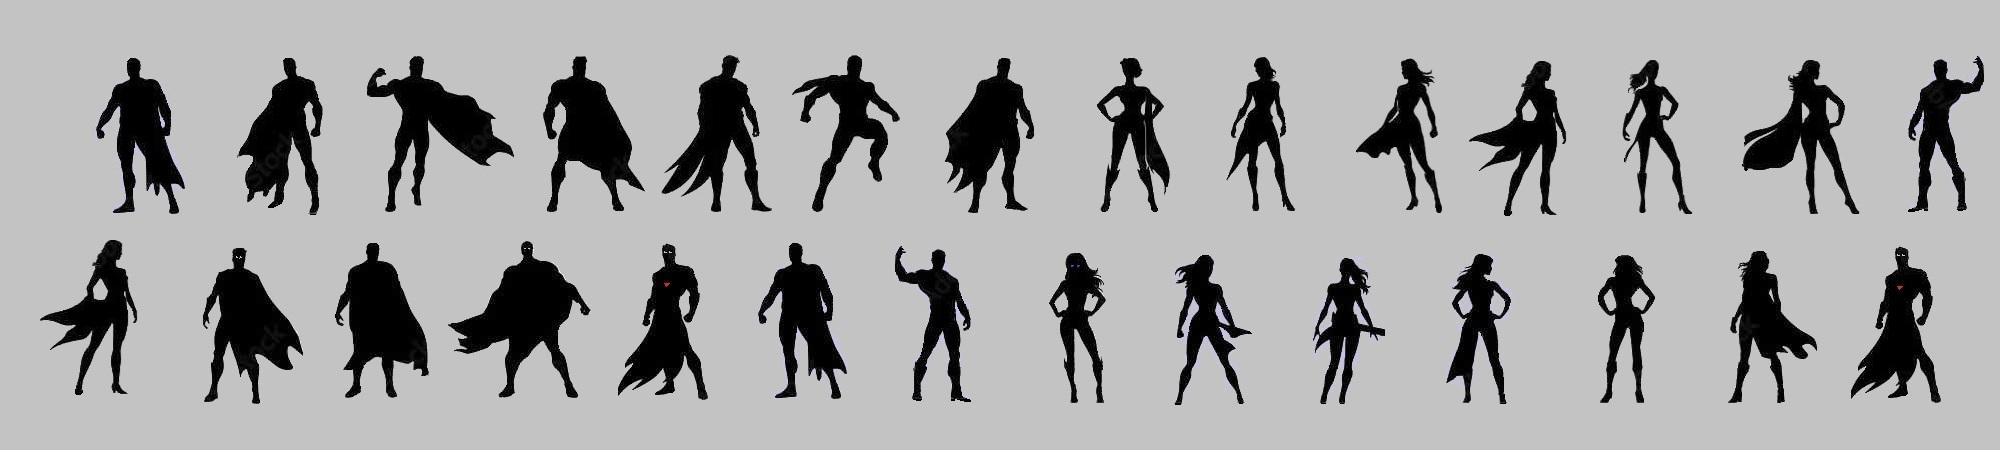 28 black silhouettes of superhuman men and women on gray.